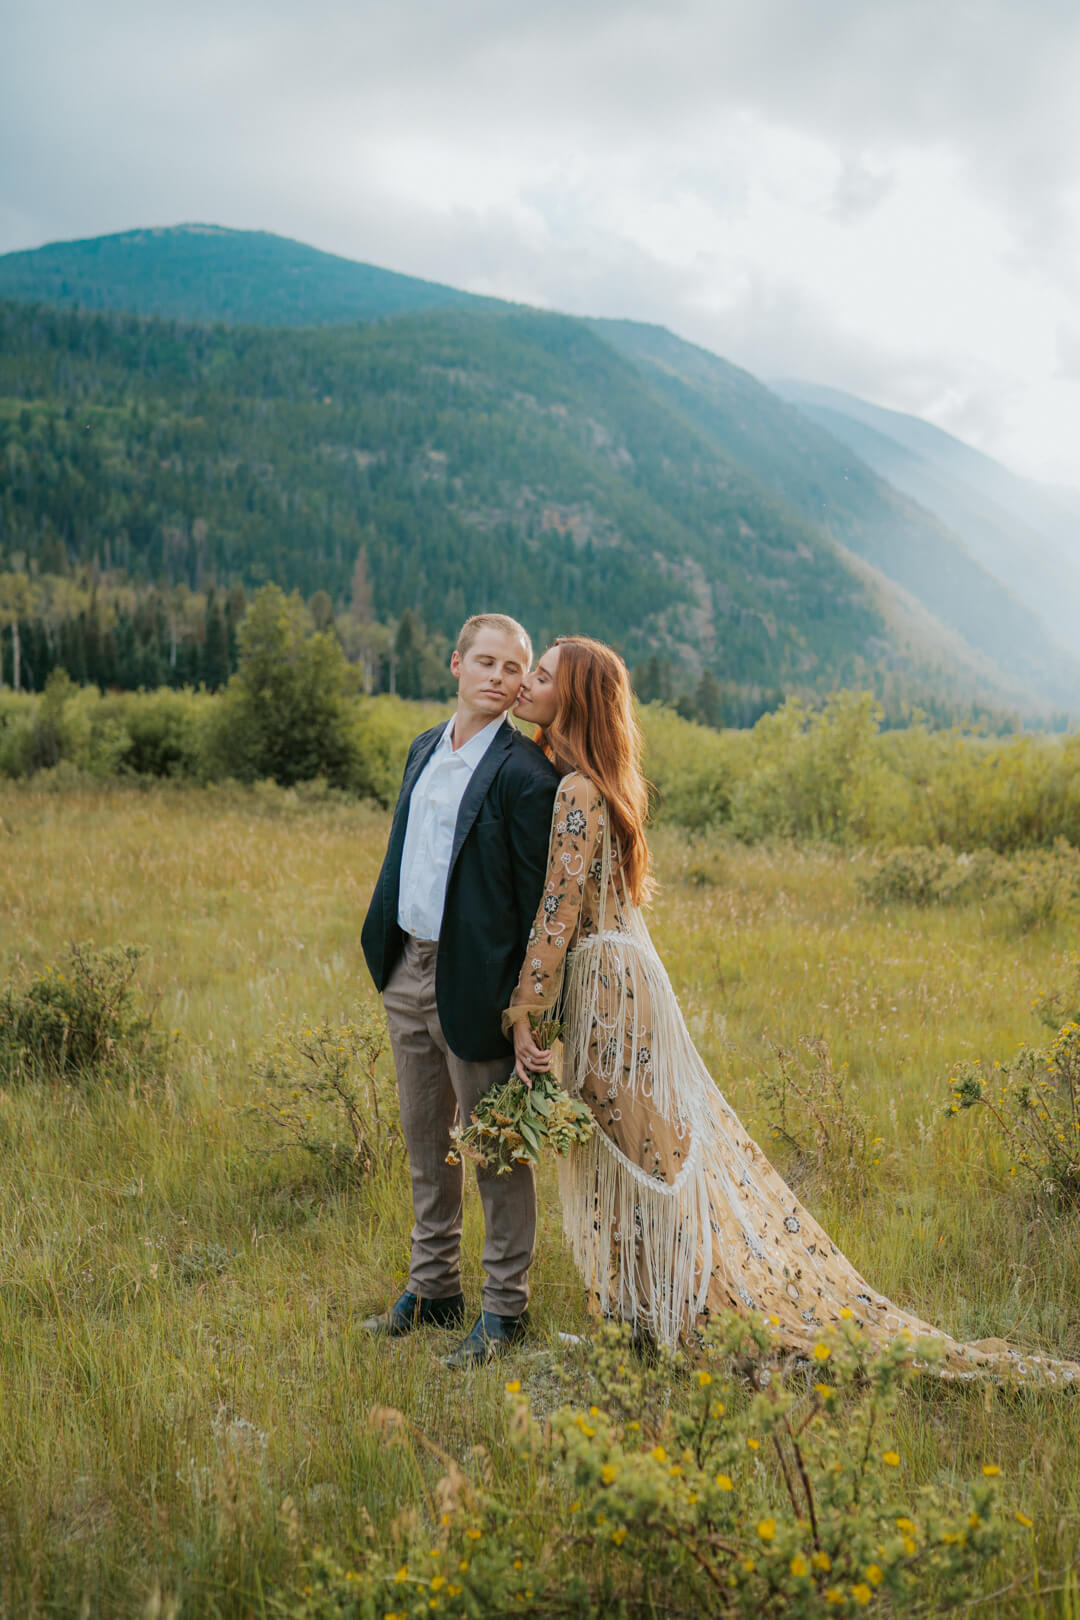 bride kissing her groom on the cheek during their Rocky Mountain National Park elopement.